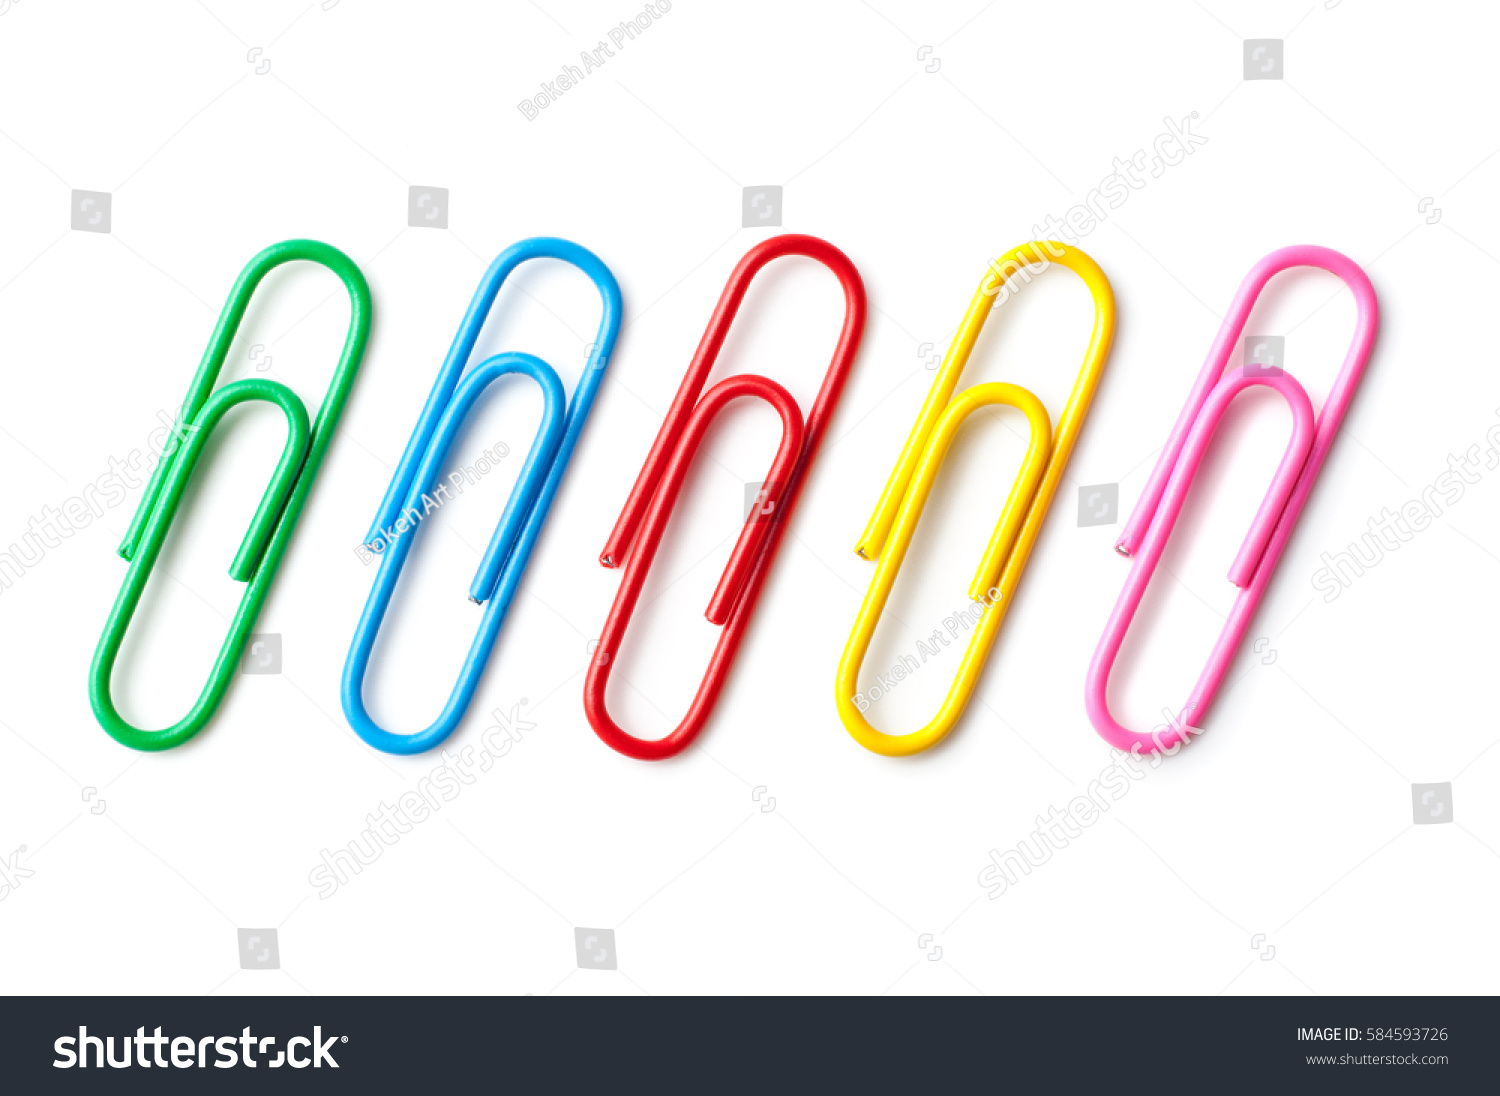 Colored paper clips close-up on a white background #584593726